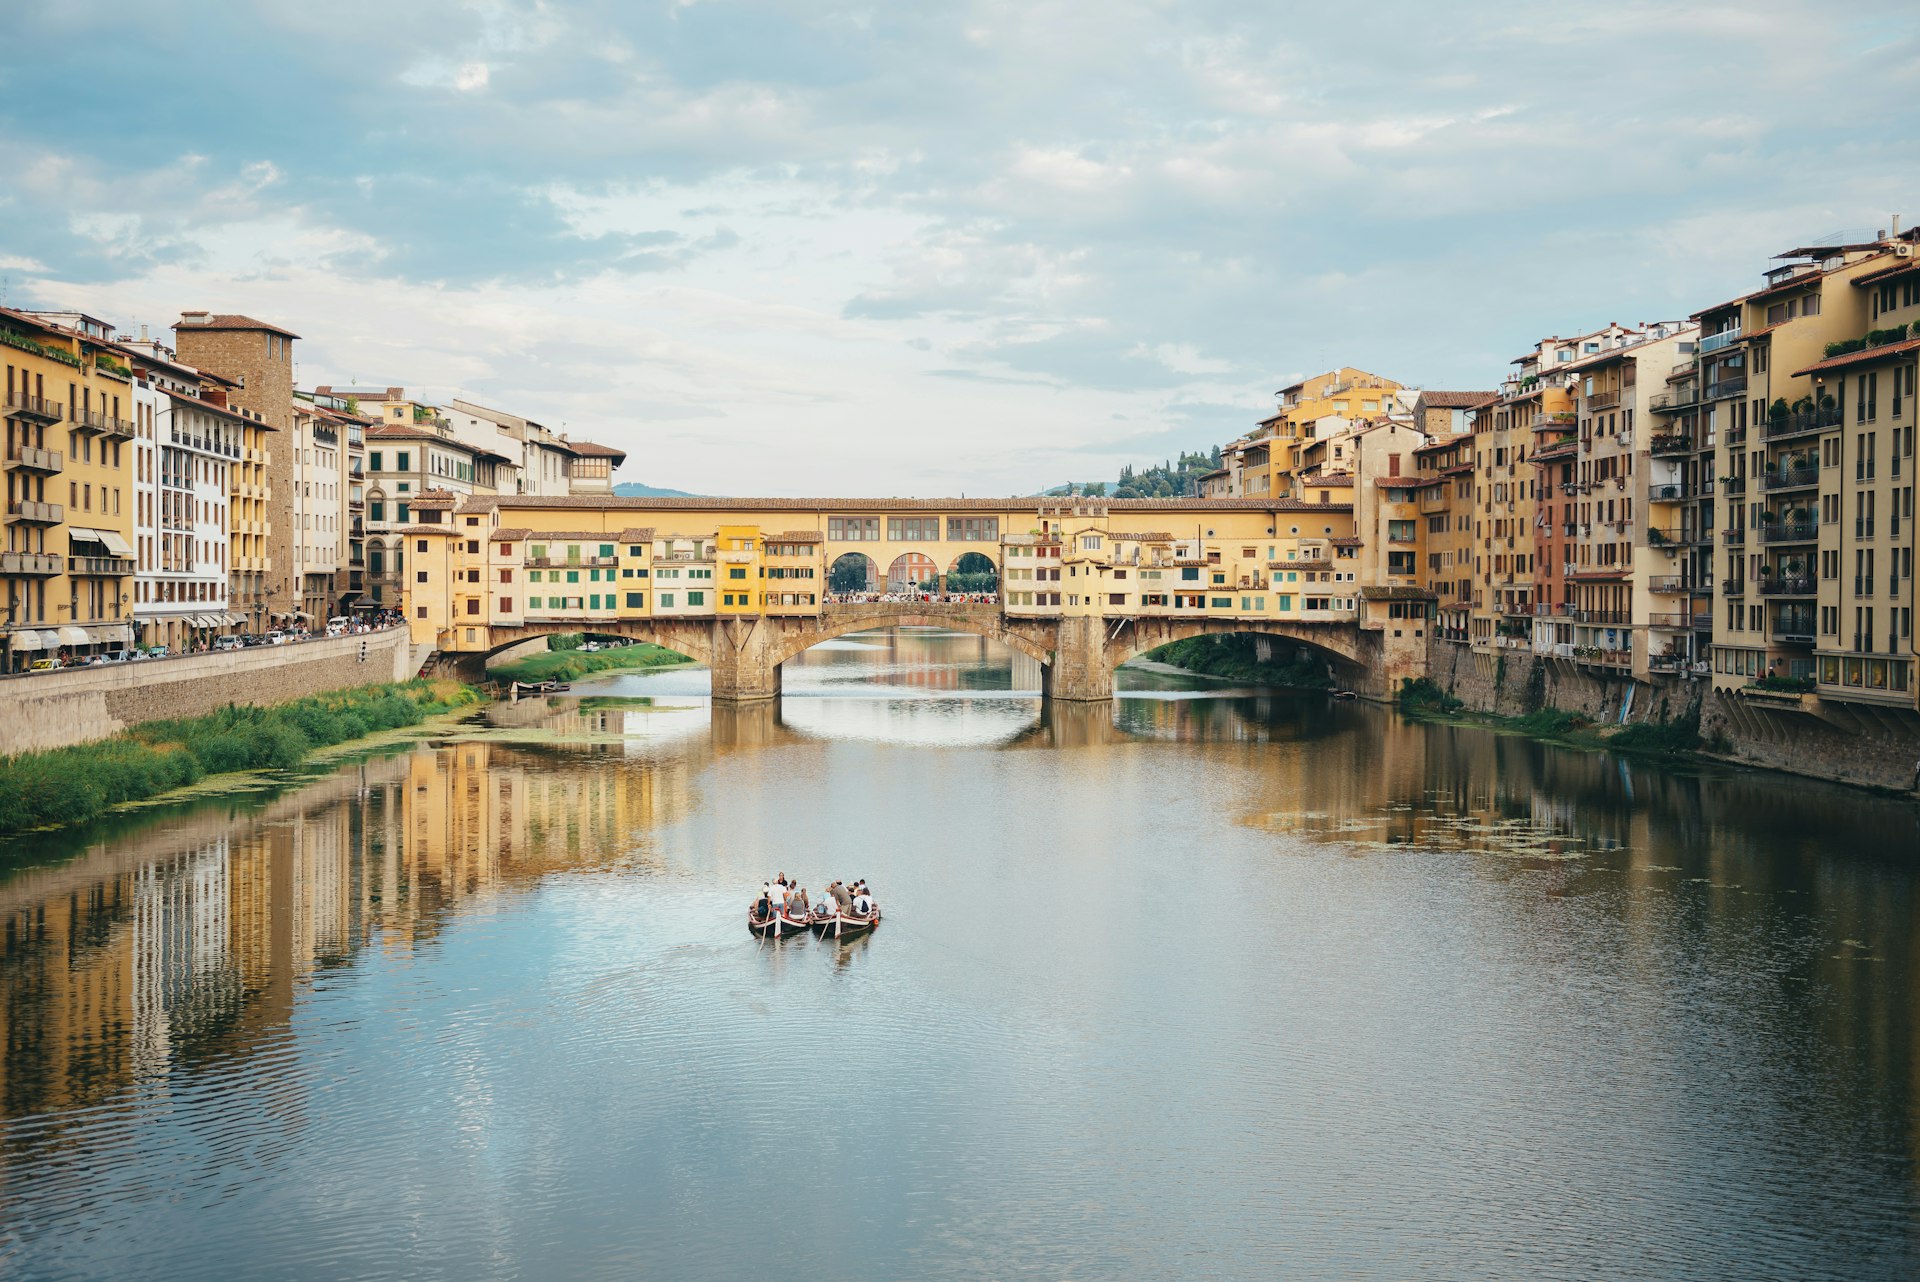 Italy, Florence, River Arno and Ponte Vecchio with two boats in the river